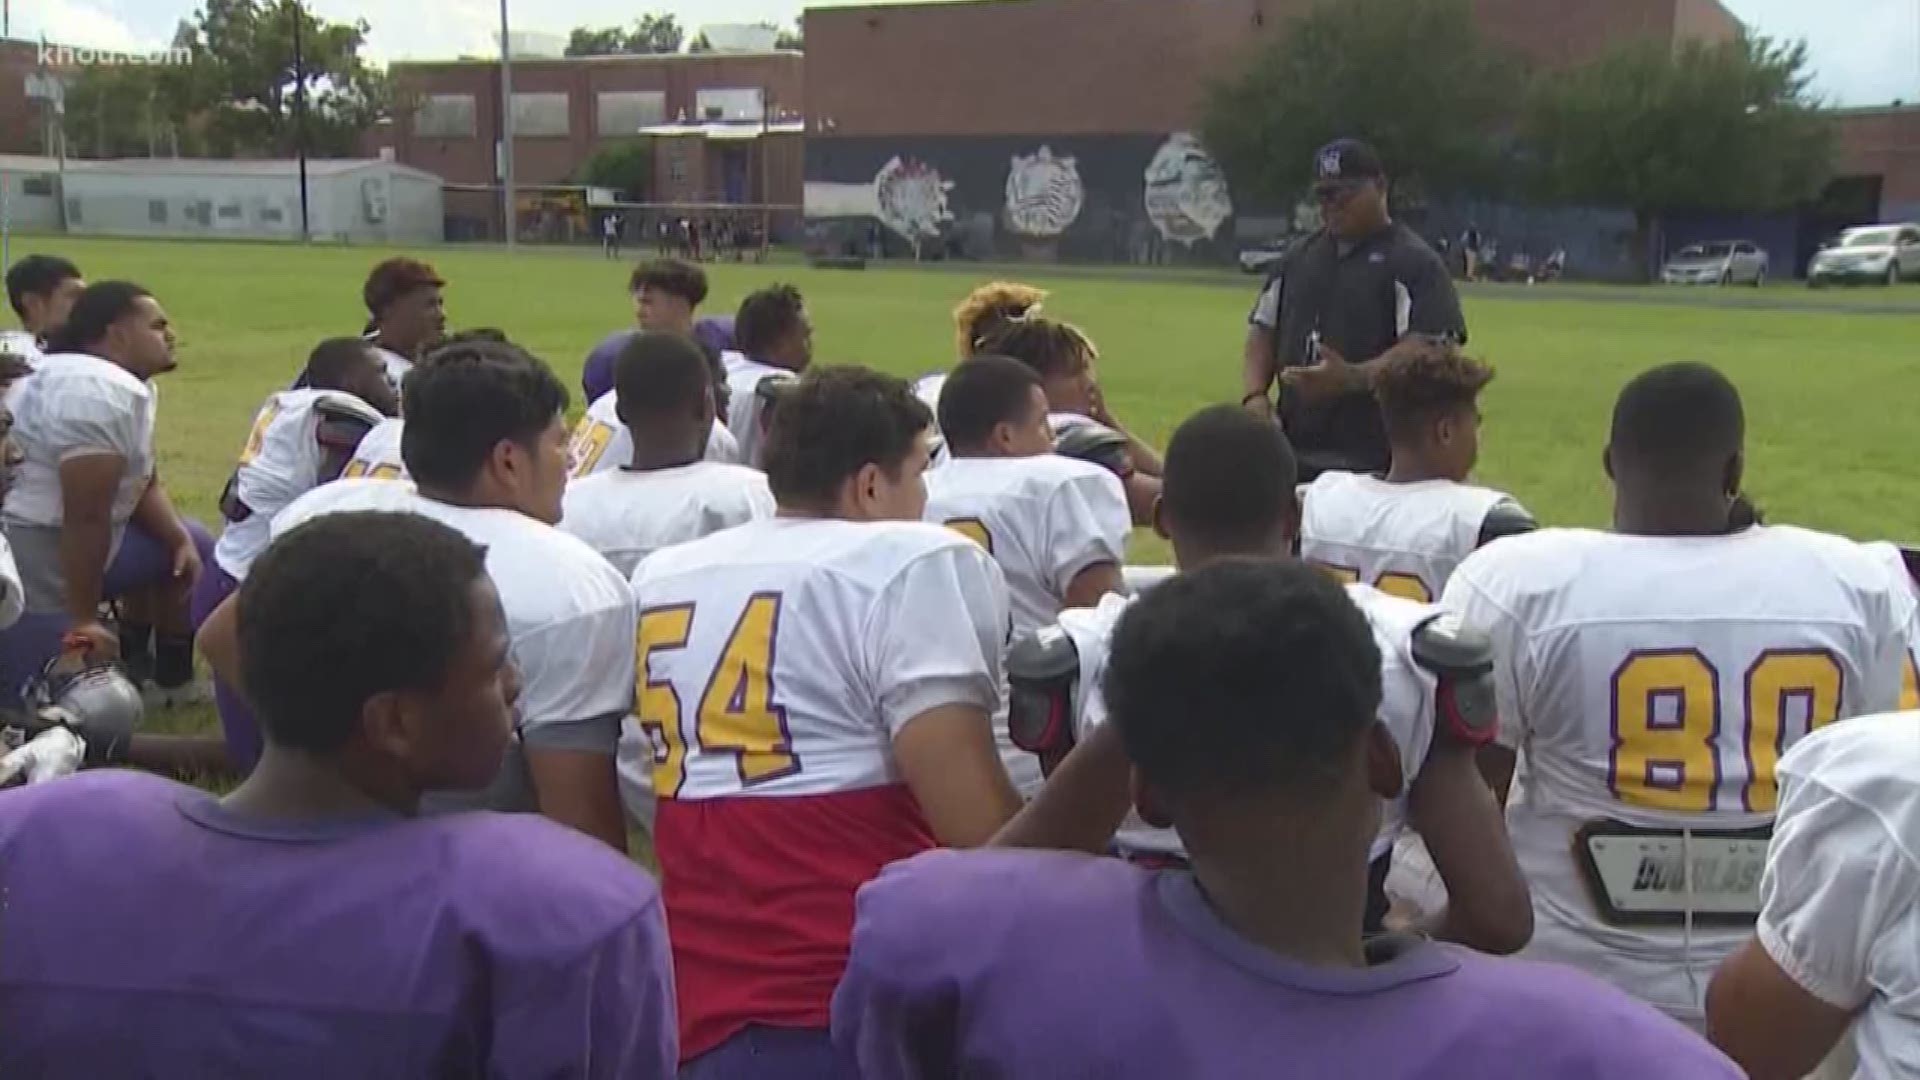 Building healthy relationships and preventing domestic violence starts at a young age and Coach Michael Porter with Northside High School's football program is working to shape his players into young men who care about others on and off the field.